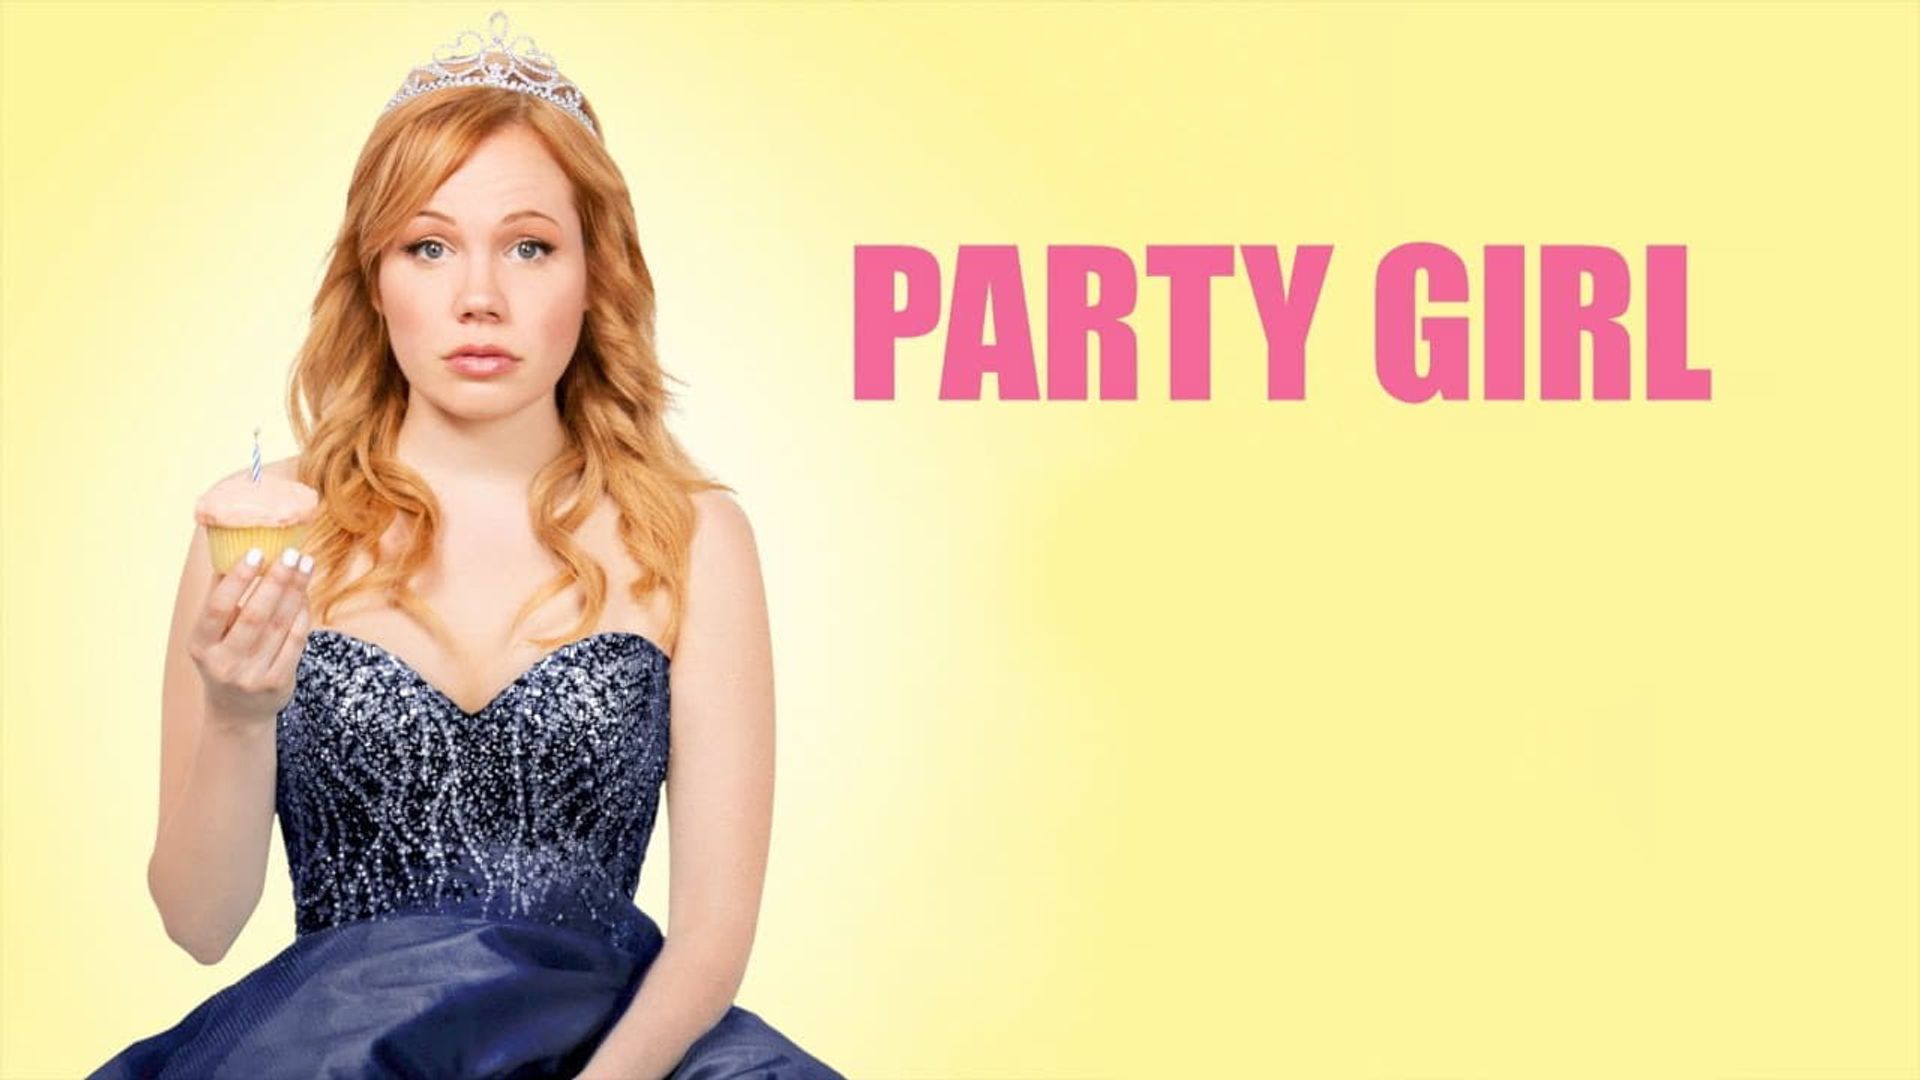 Party Girl background